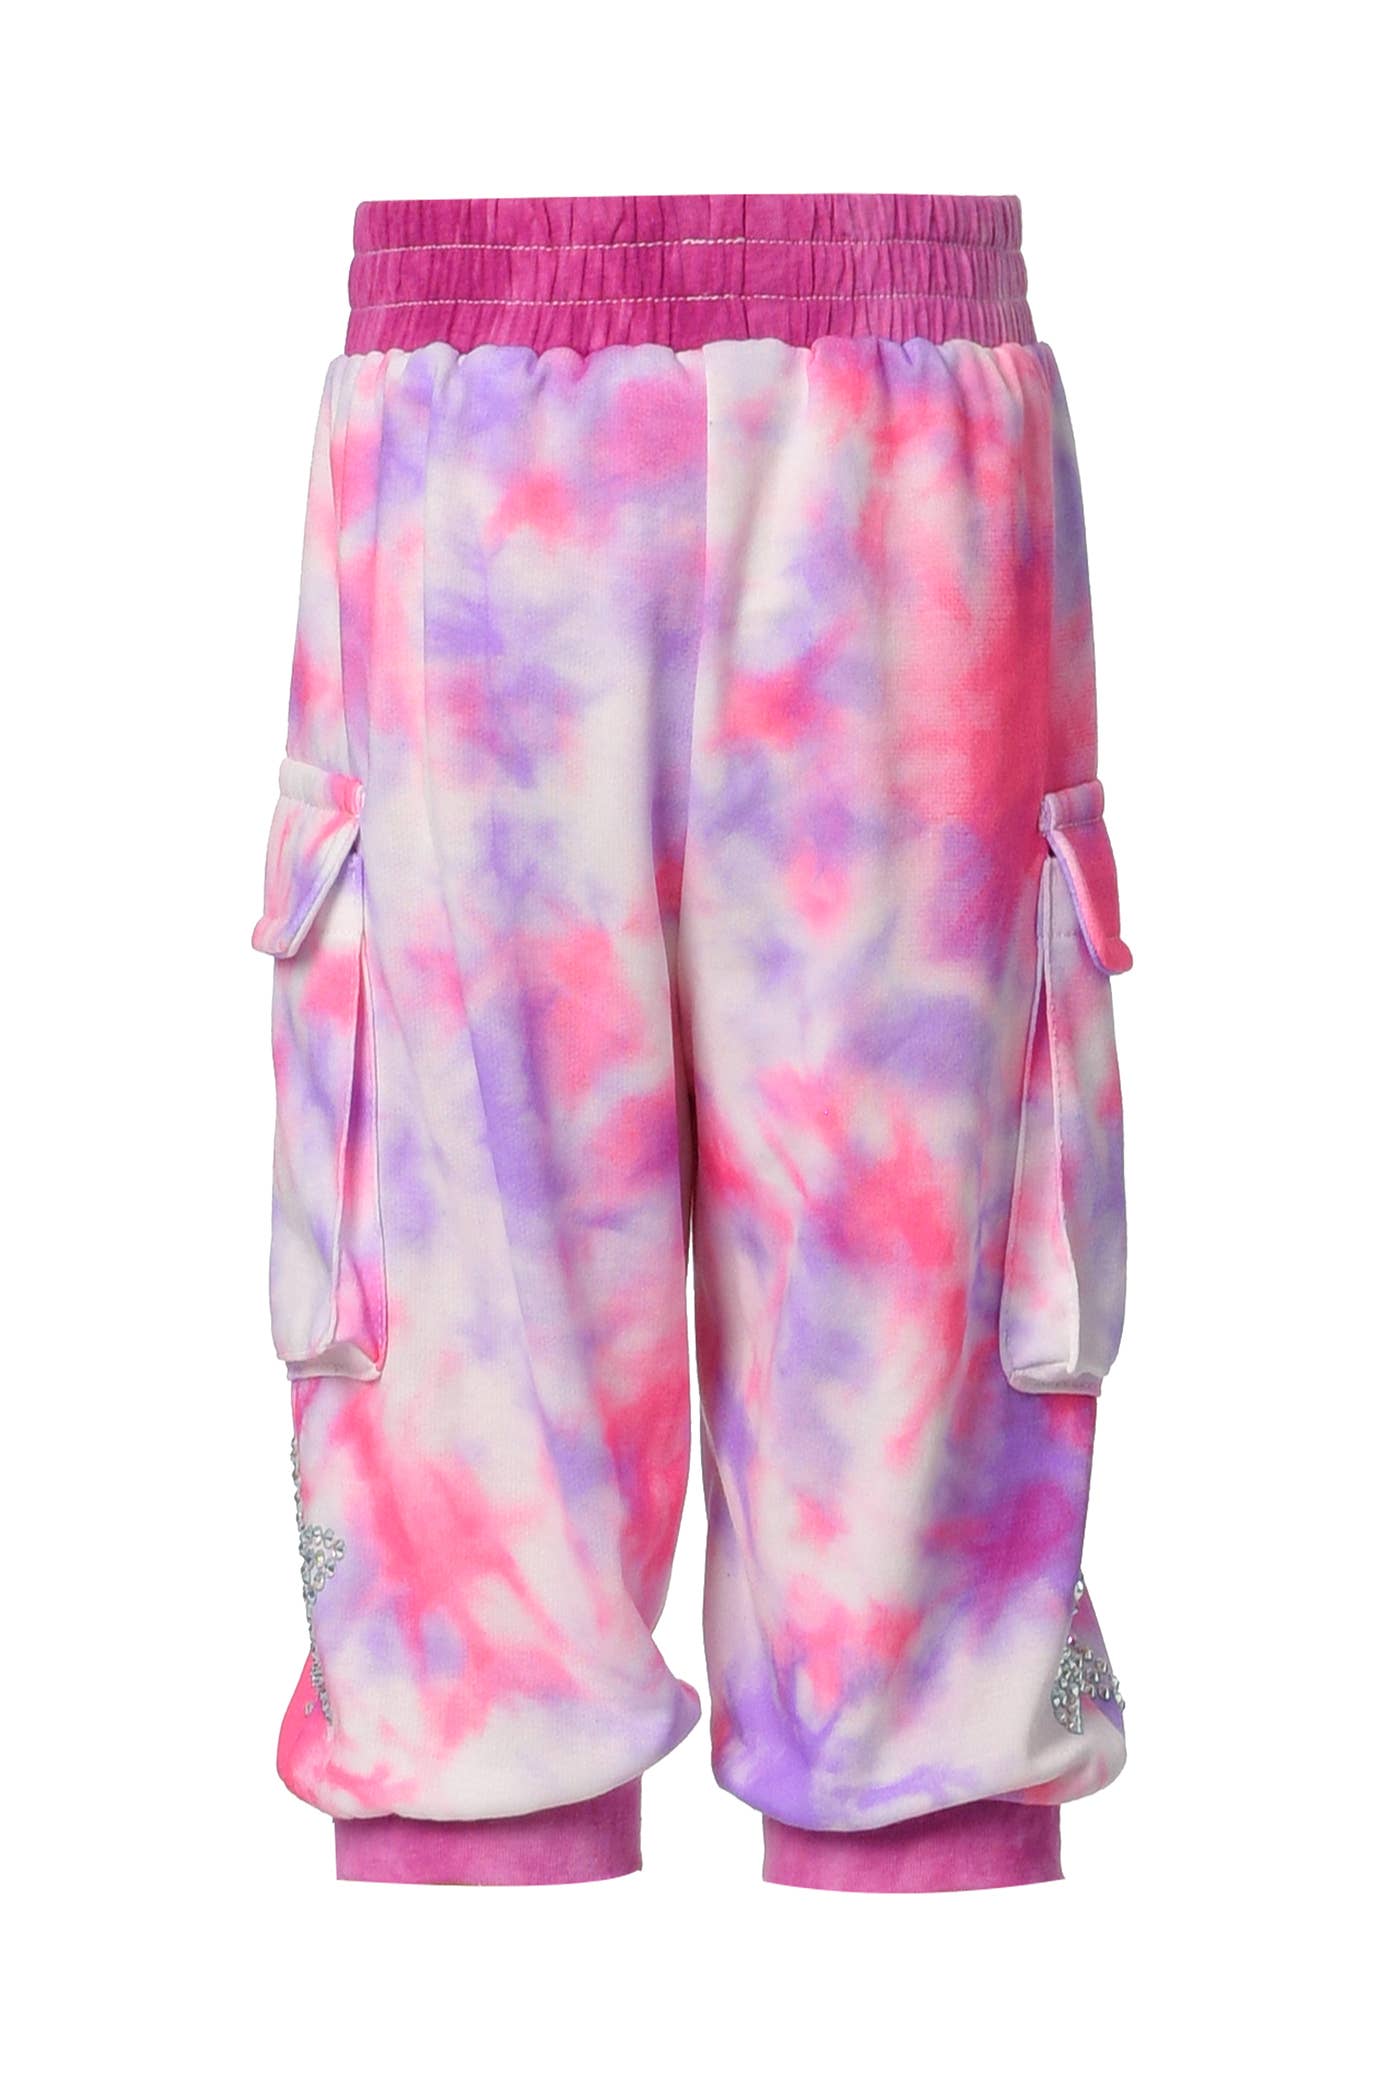 Make a funky fashion statement with these one-of-a-kind Hannah Banana Pink Tie Dye Cargo Joggers. Vibrant and eye-catching, these joggers are sure to shake up your style routine! Cool and comfy, you won't be able to resist the urge to show them off. Get ready to wow them!